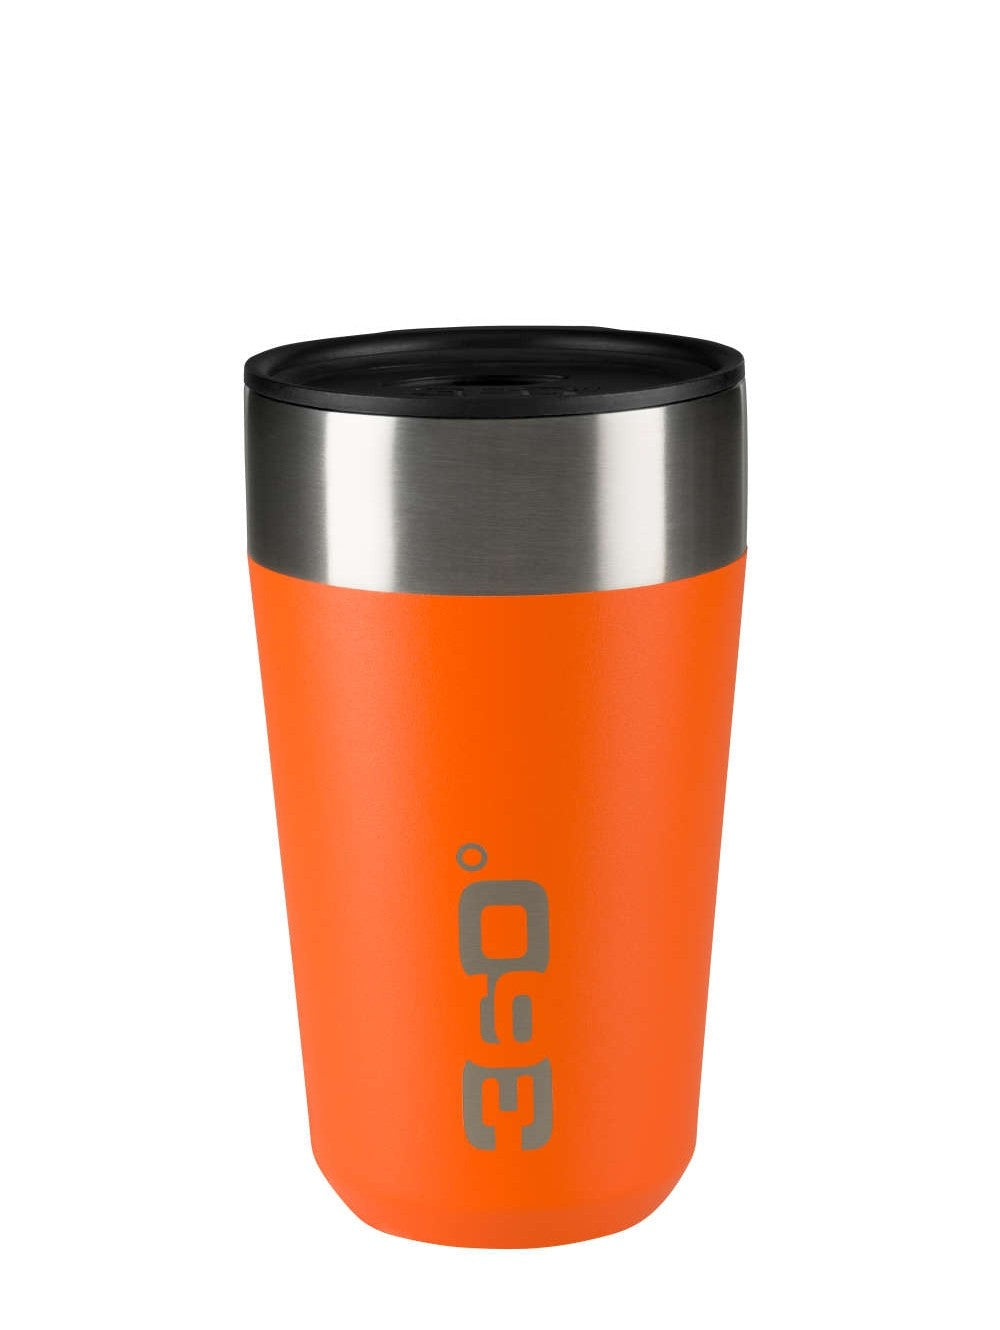 360 Degrees Vacuum Insulated Stainless Travel Mug - Large Size - Pumpkin | 360 Degrees